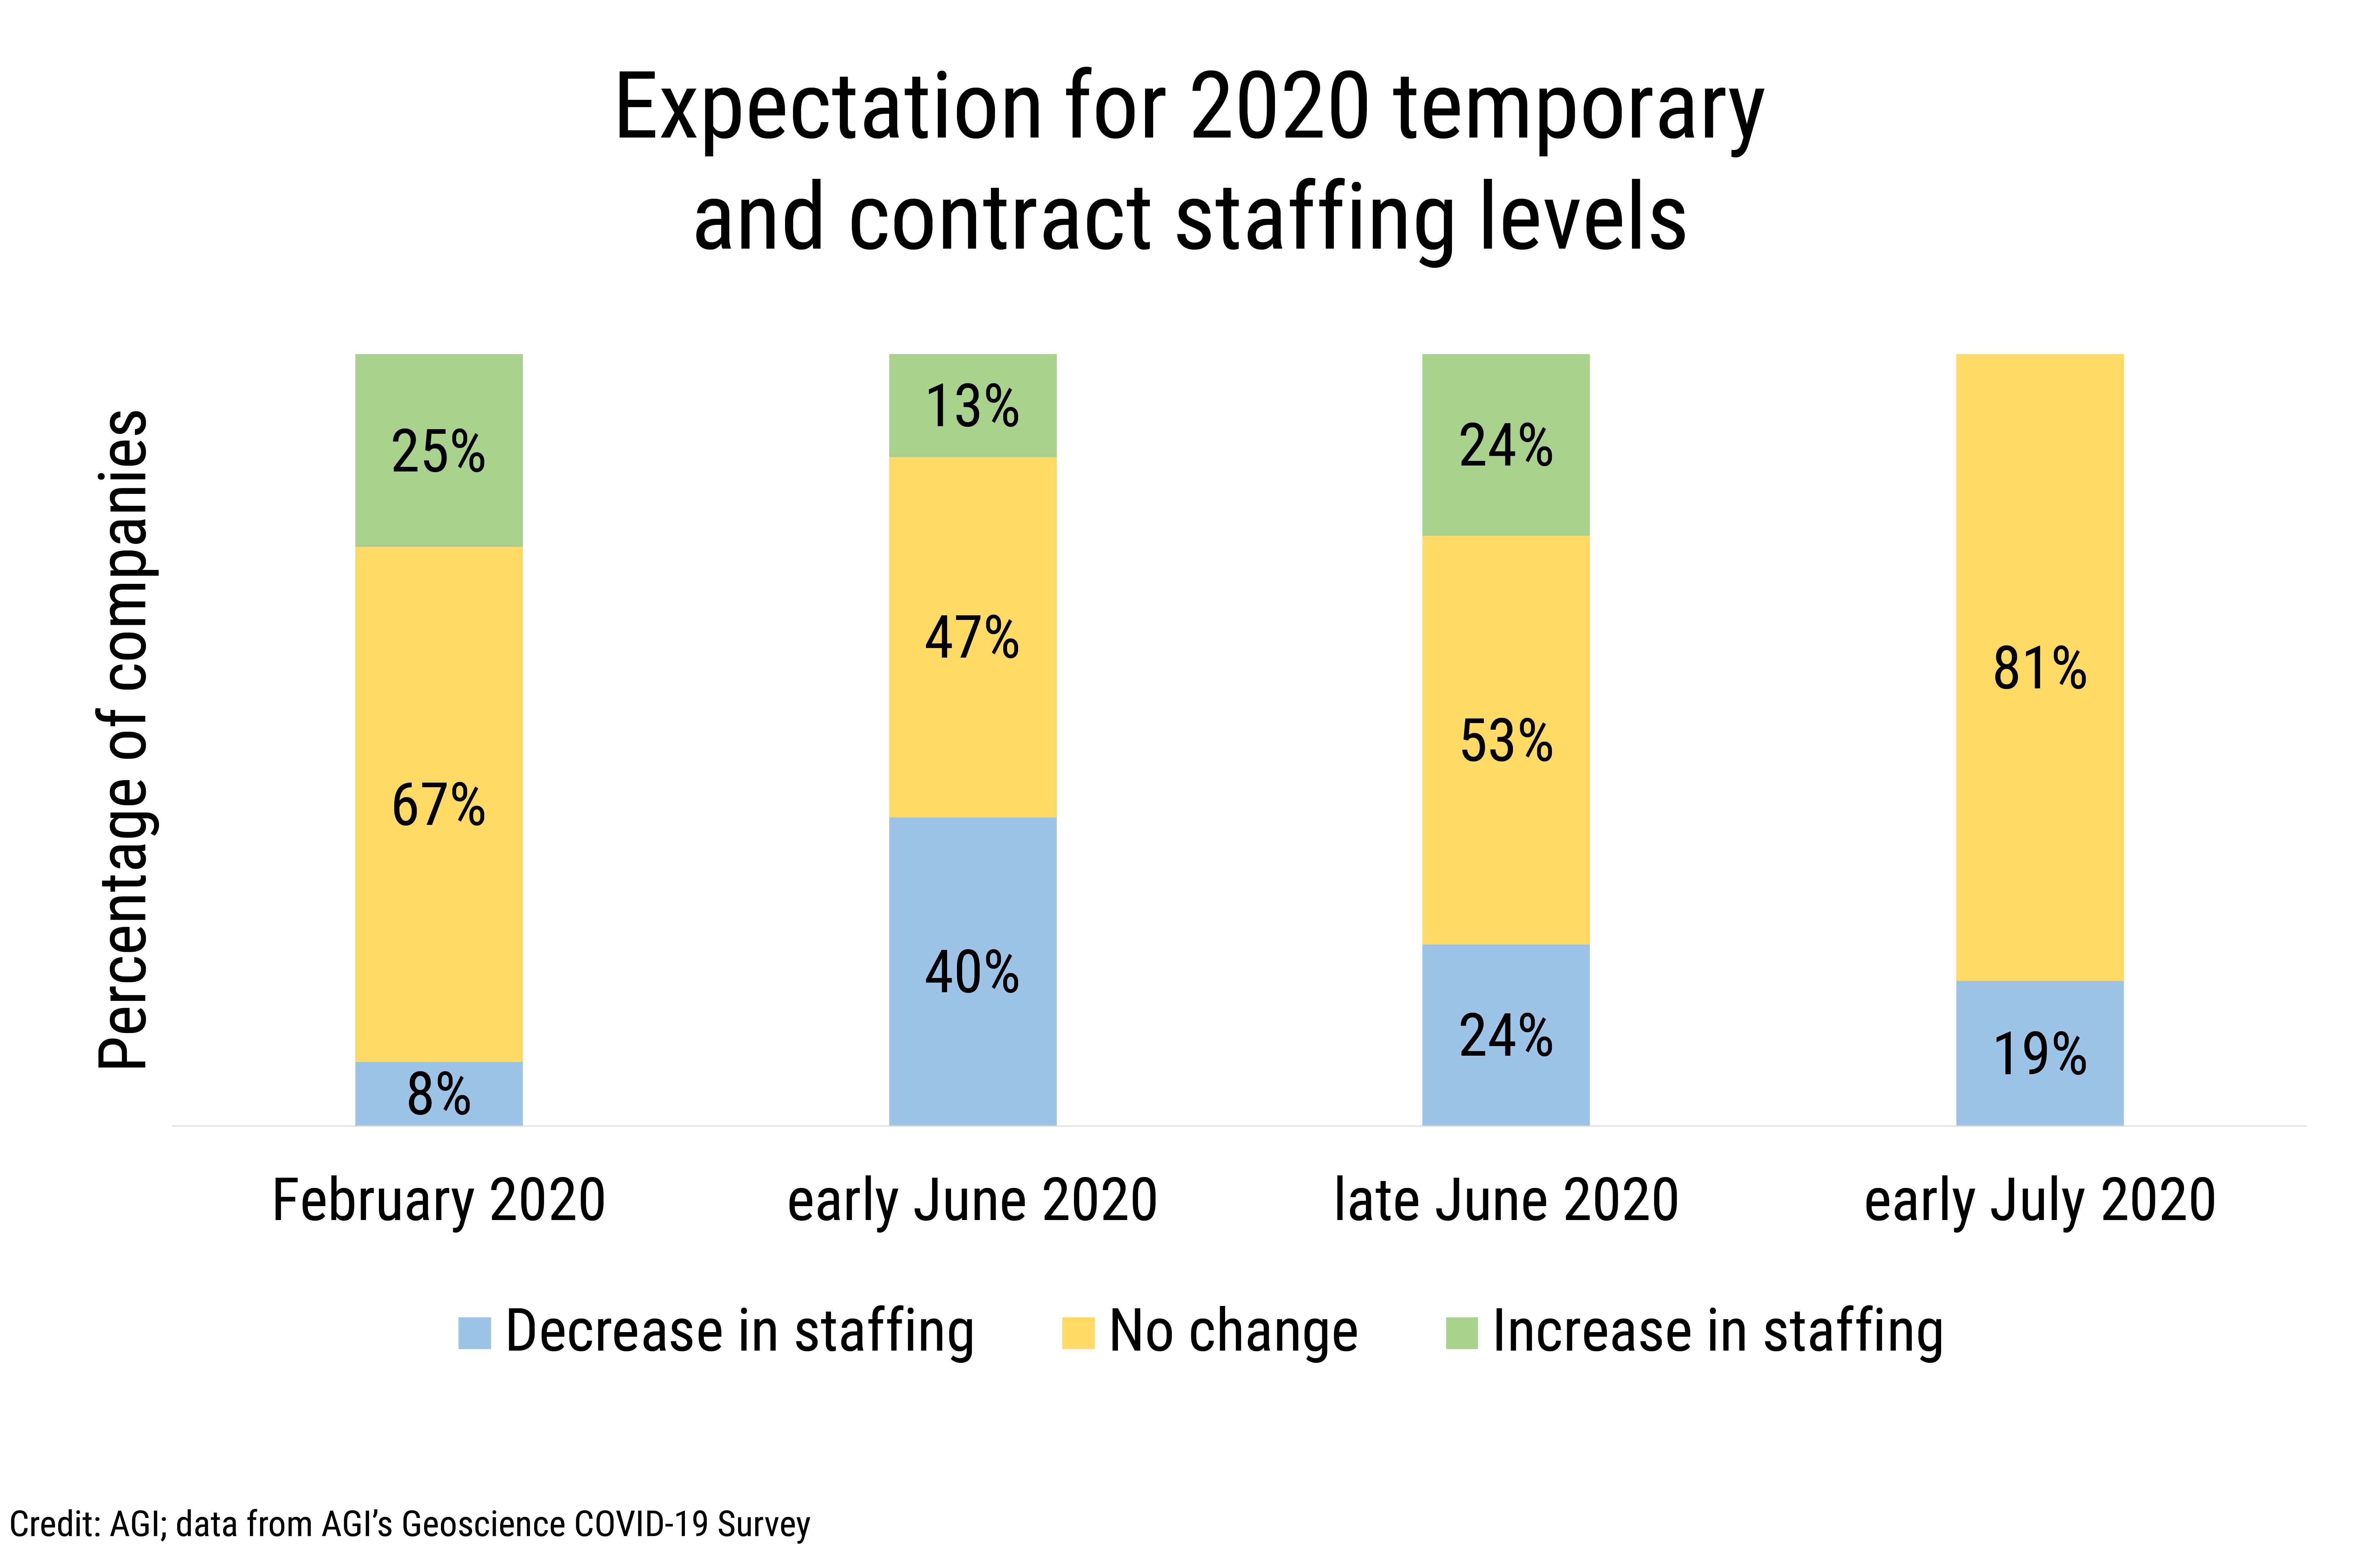 Data Brief 2020-012 chart-02: Expectation for 2020 temporary and contract staffing levels. (Credit: AGI; data from AGI's Geoscience COVID-19 Survey)